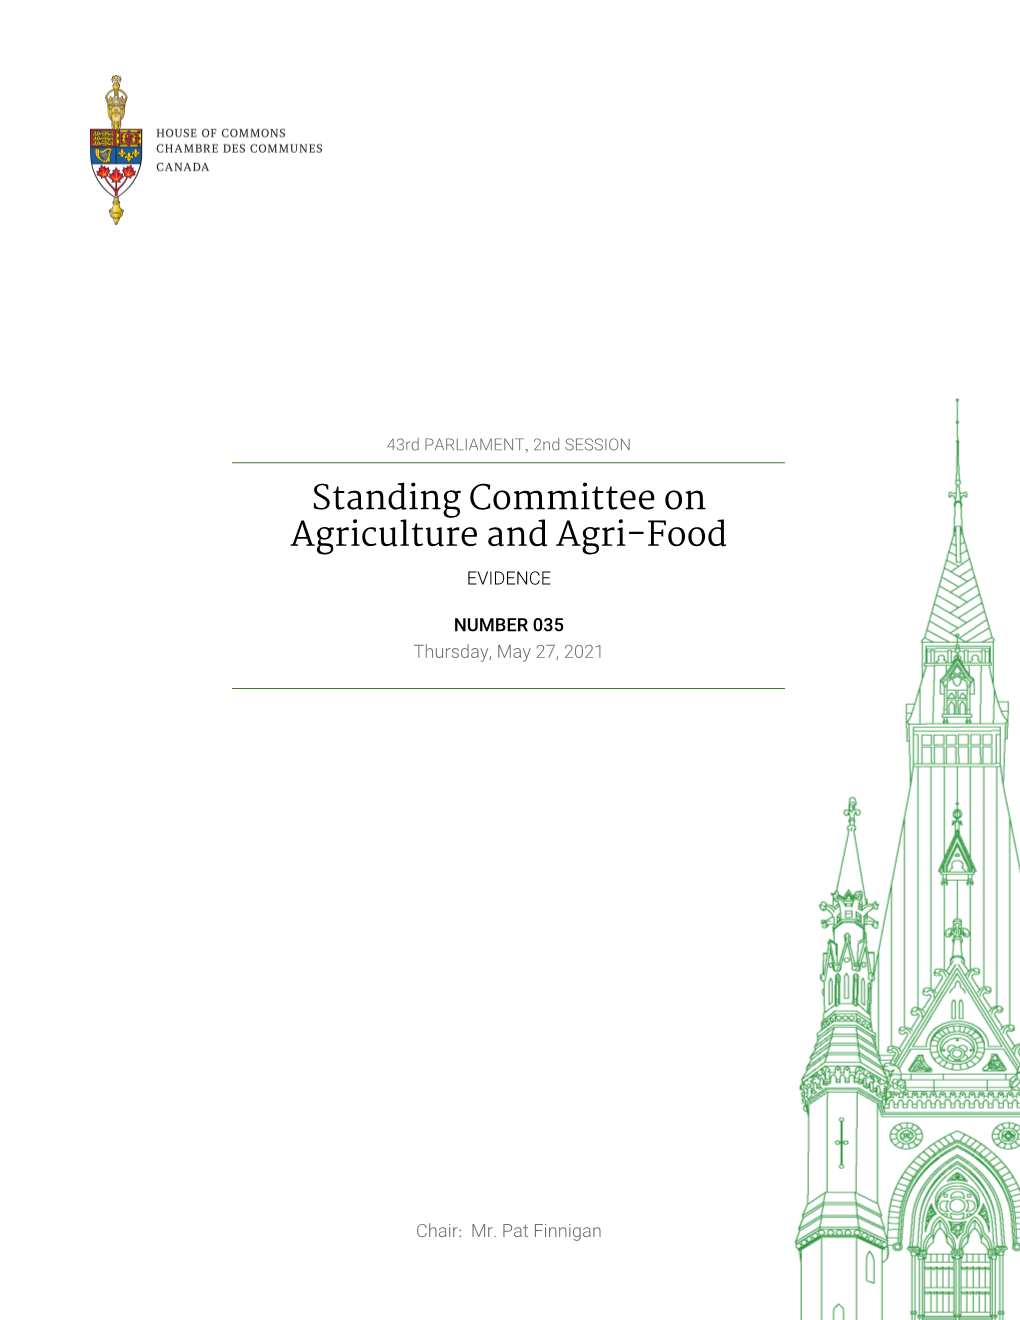 Evidence of the Standing Committee on Agriculture